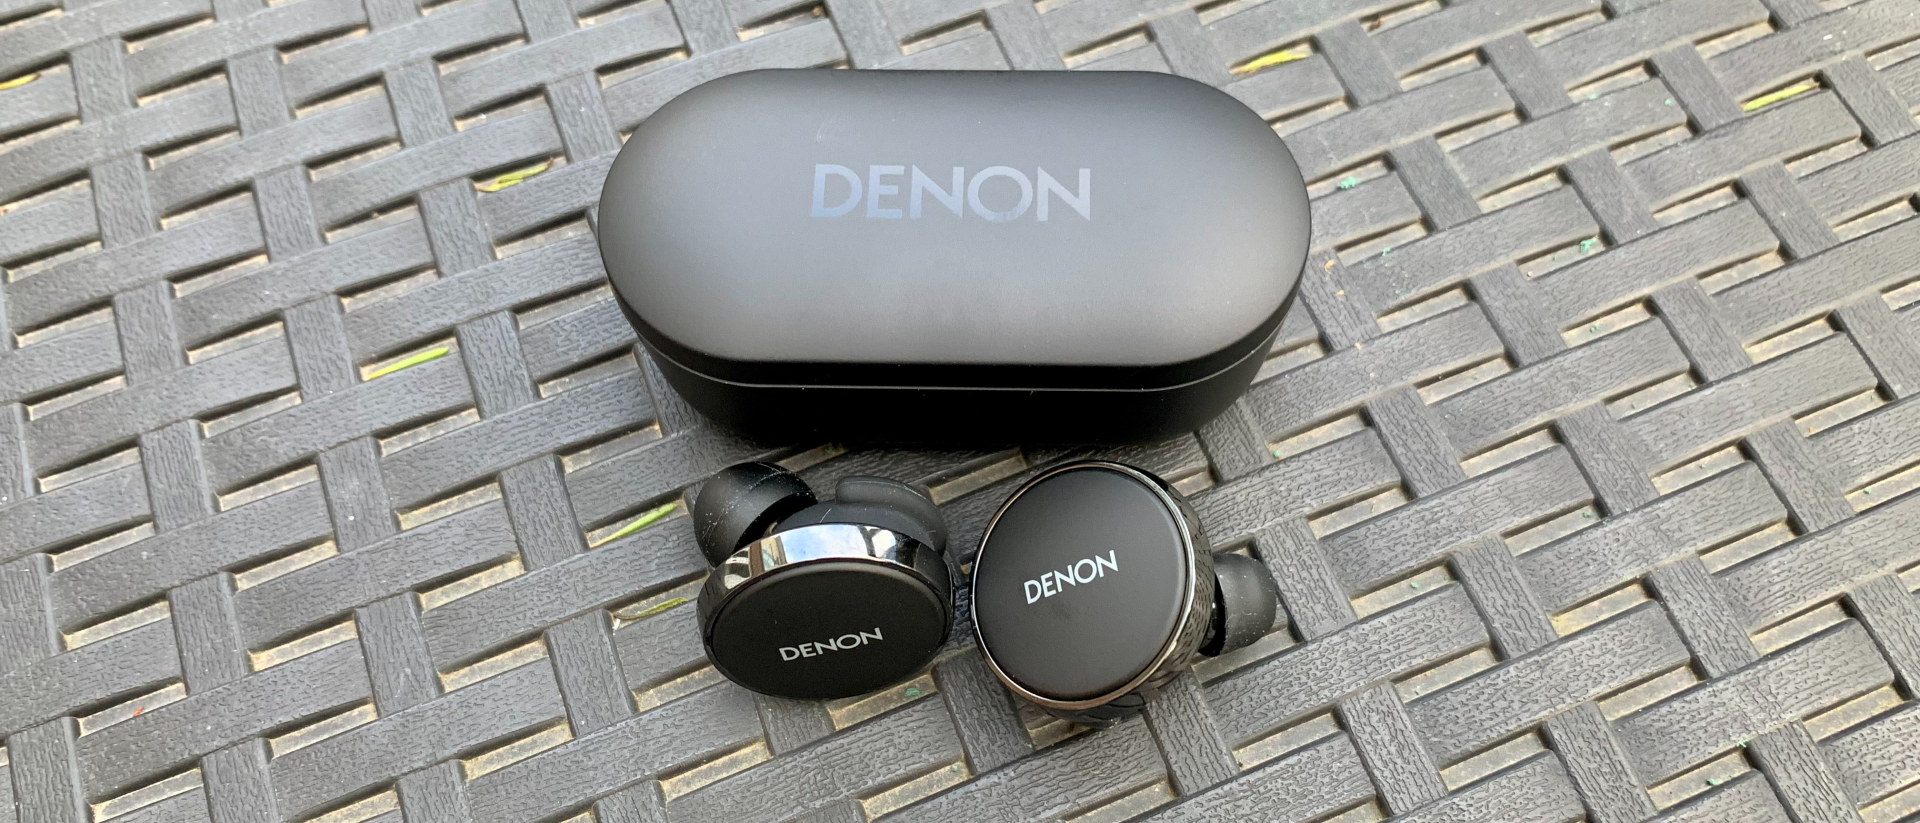 Denon PerL Pro review: TechRadar with bulky profiles but a excellent wireless sonic spatial design audio, | earbuds and